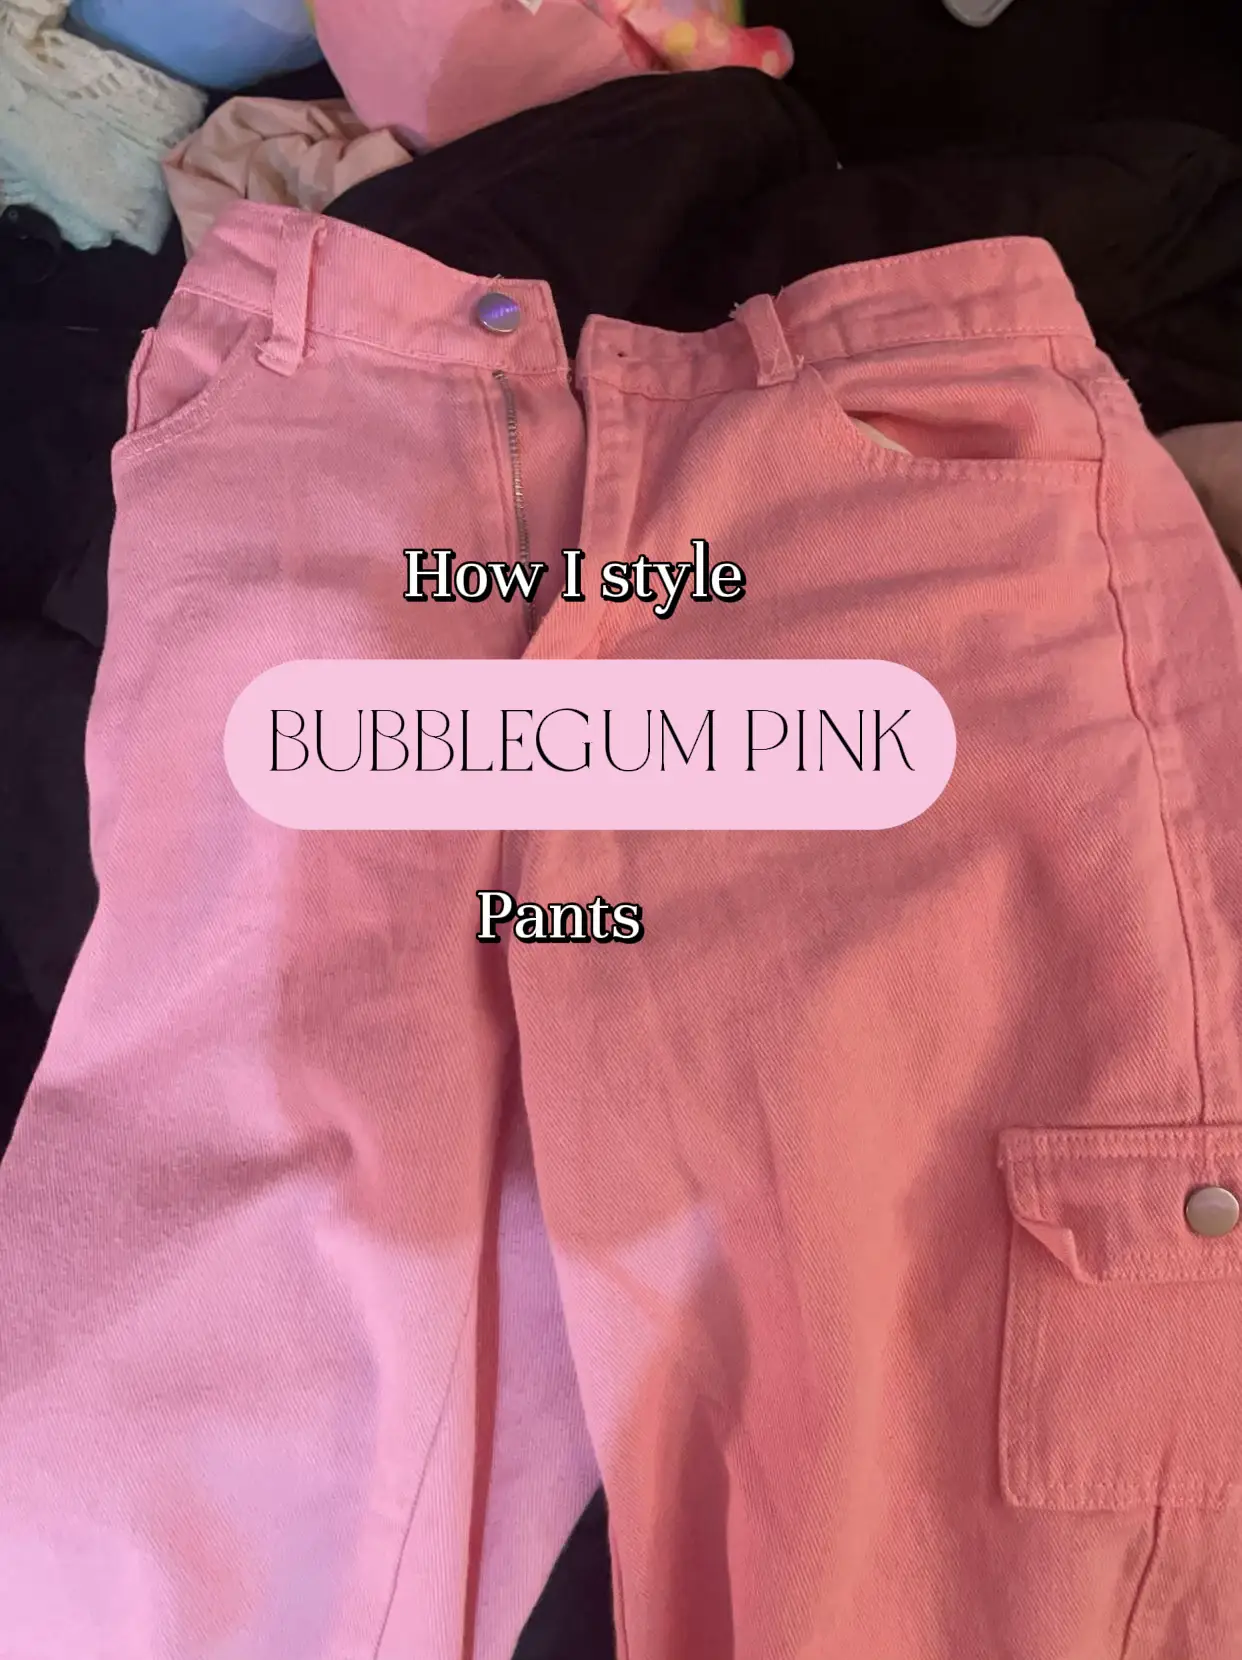 HOW TO WEAR HOT PINK PANTS! #fashion #ootd 